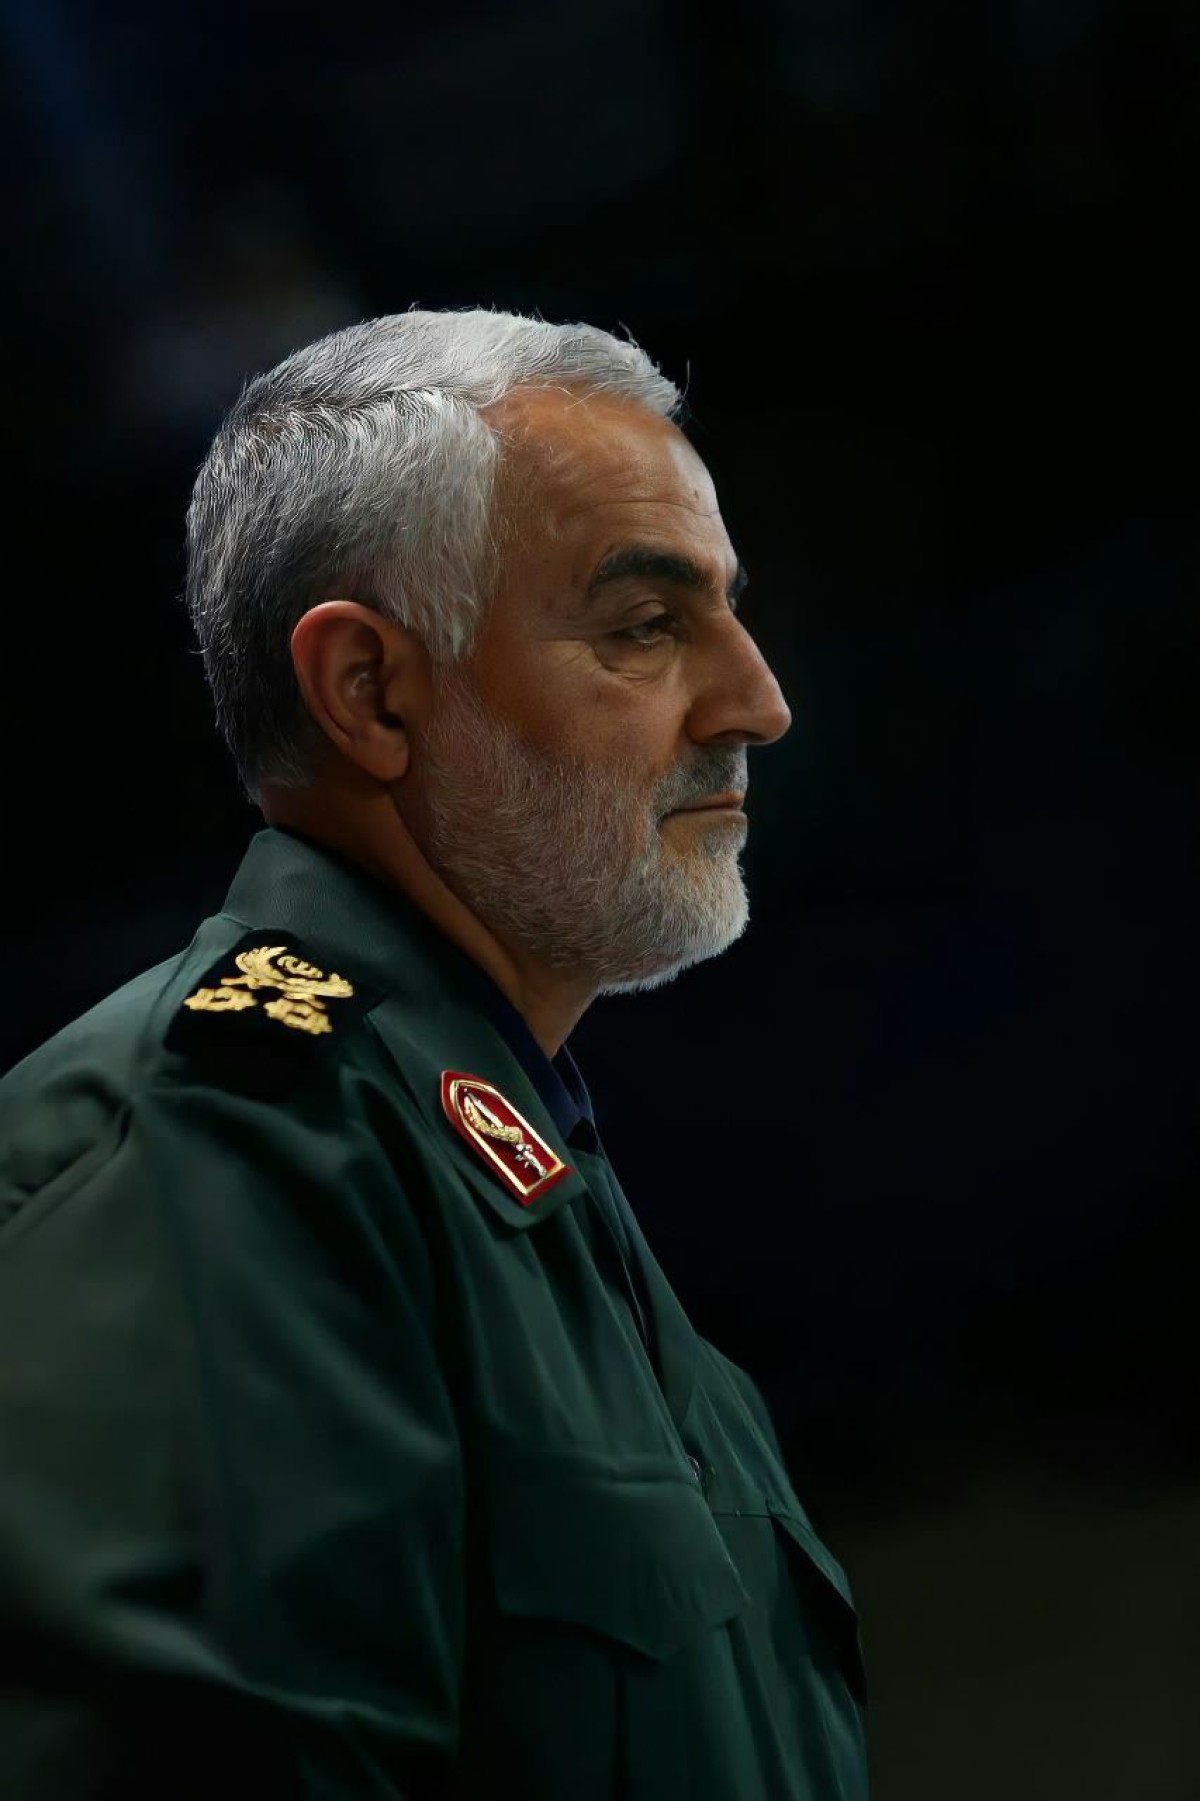 What were the consequences of Gen. Soleimani’s martyrdom for the Resistance Axis and US imperialism?